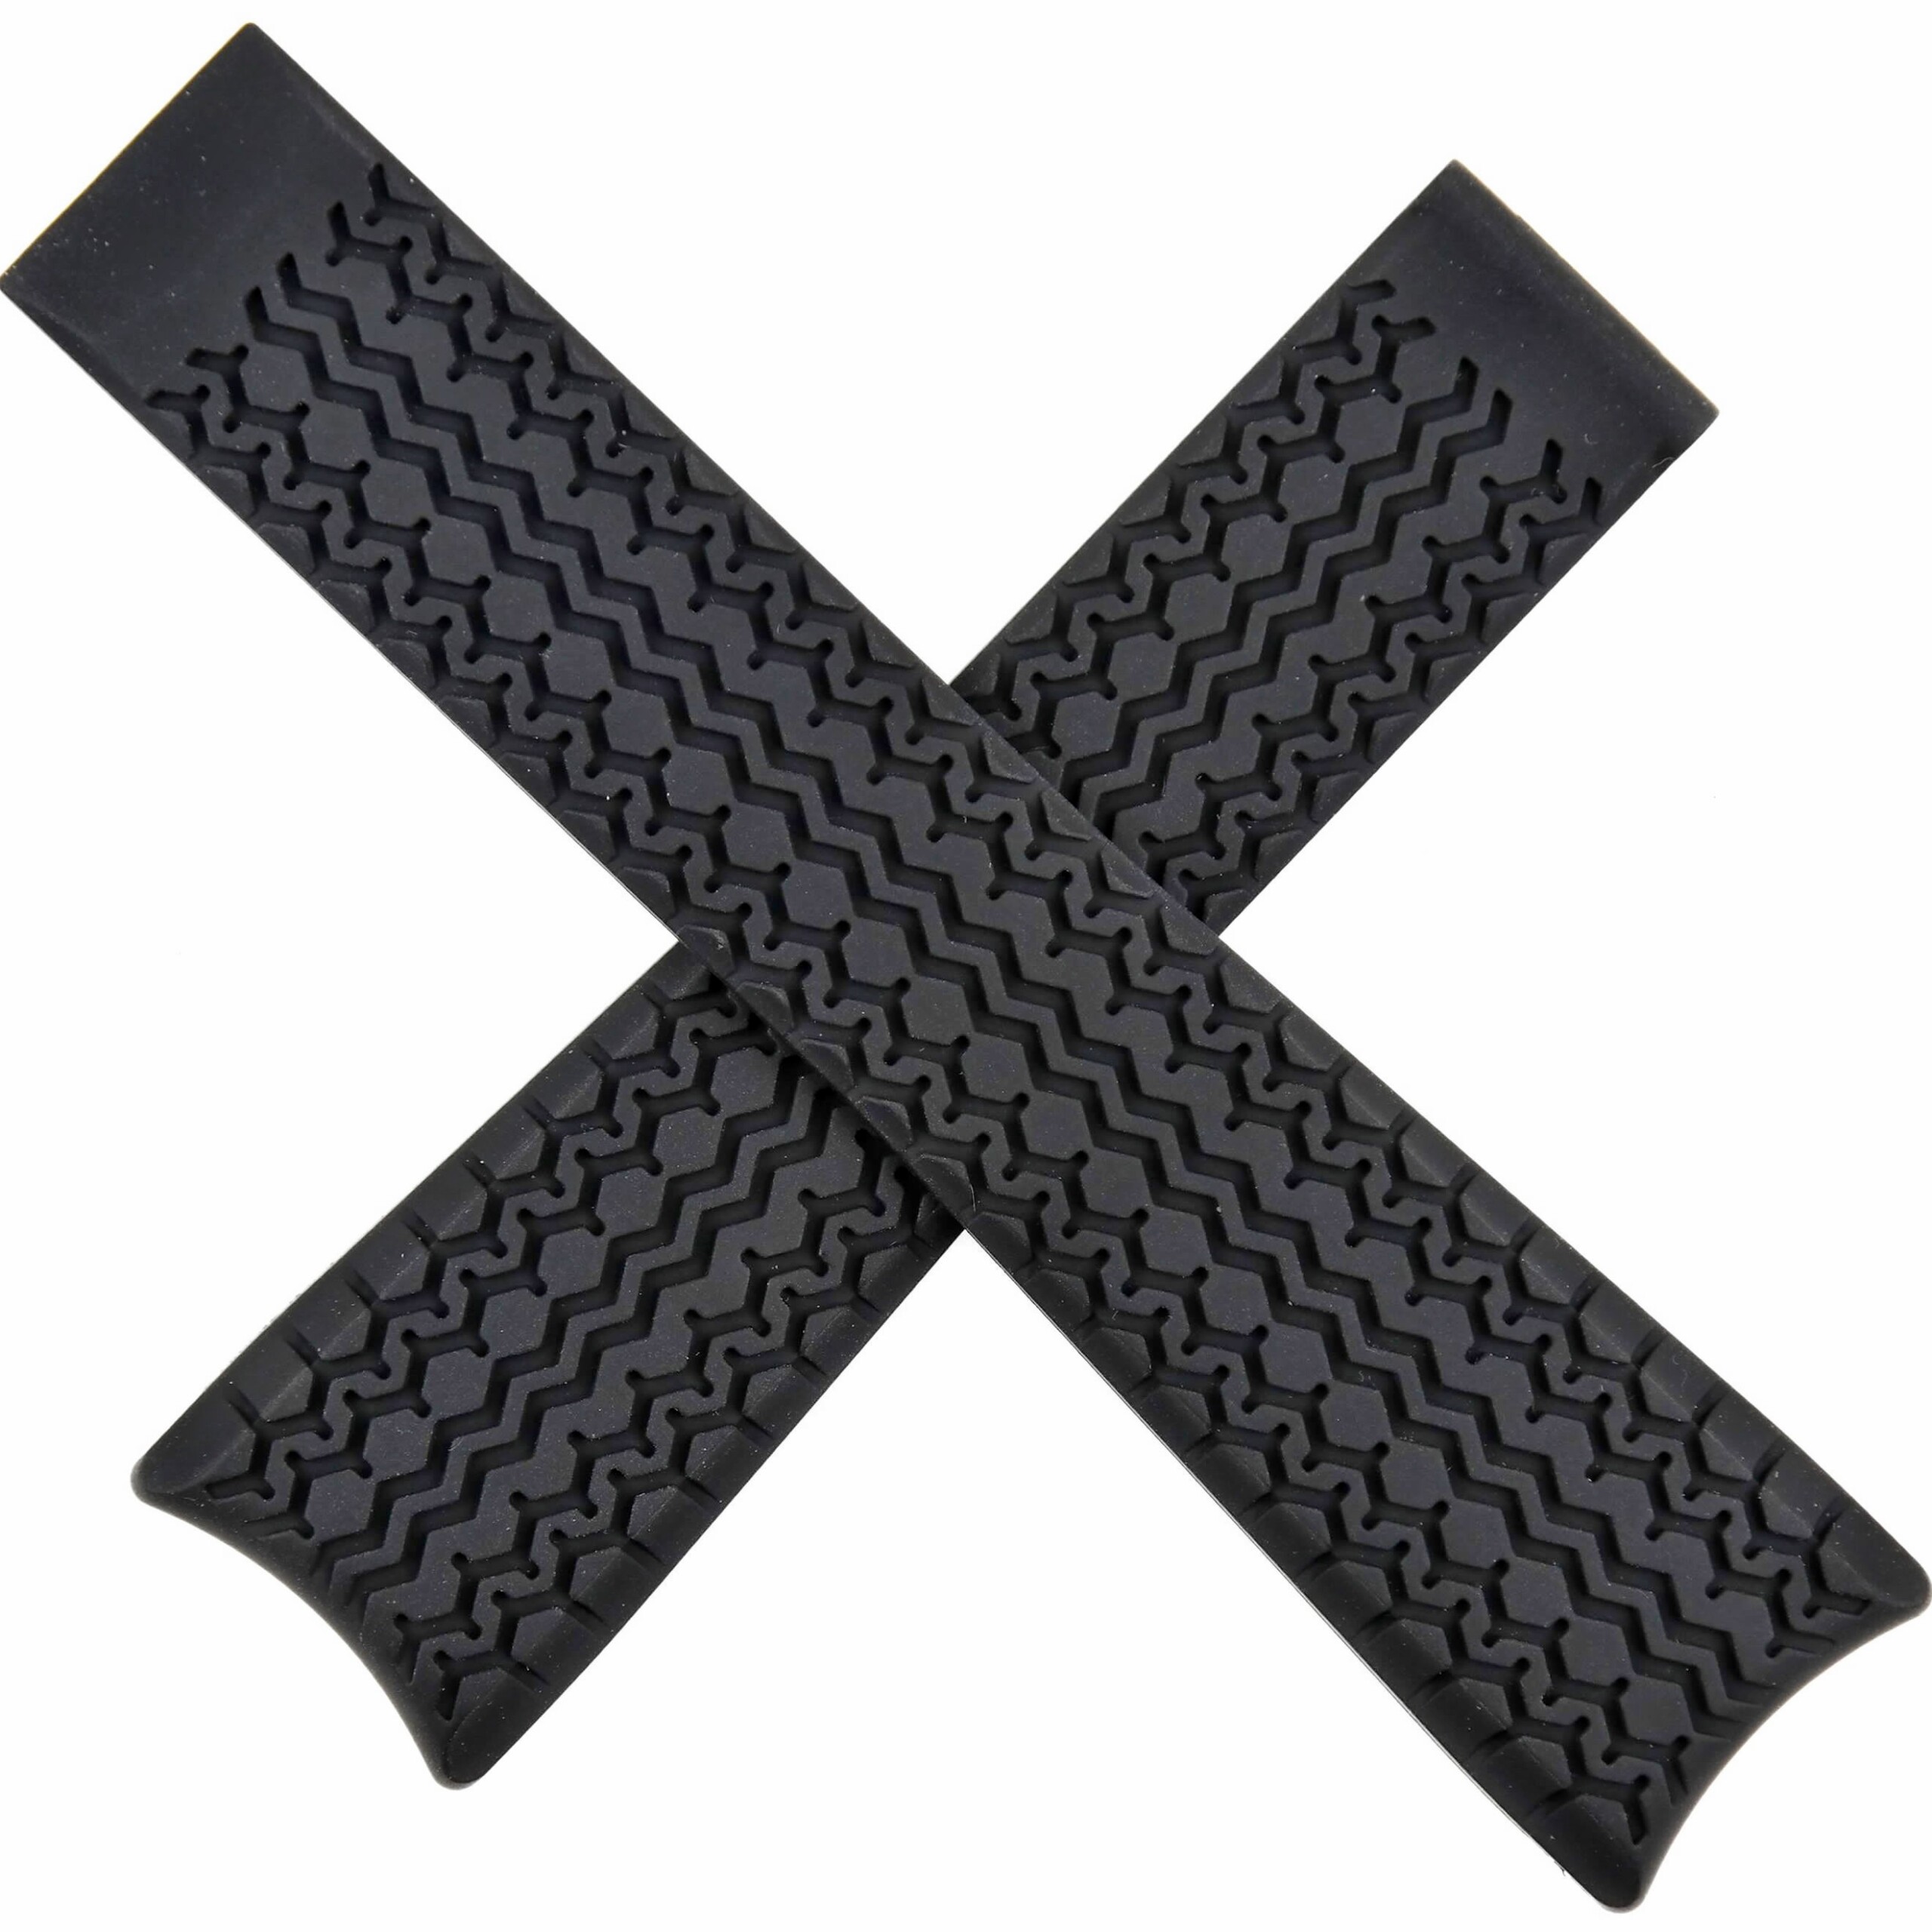 Authentic TAG Heuer Watch Strap - Rubber - 22 mm - FT6033 - Grand Prix